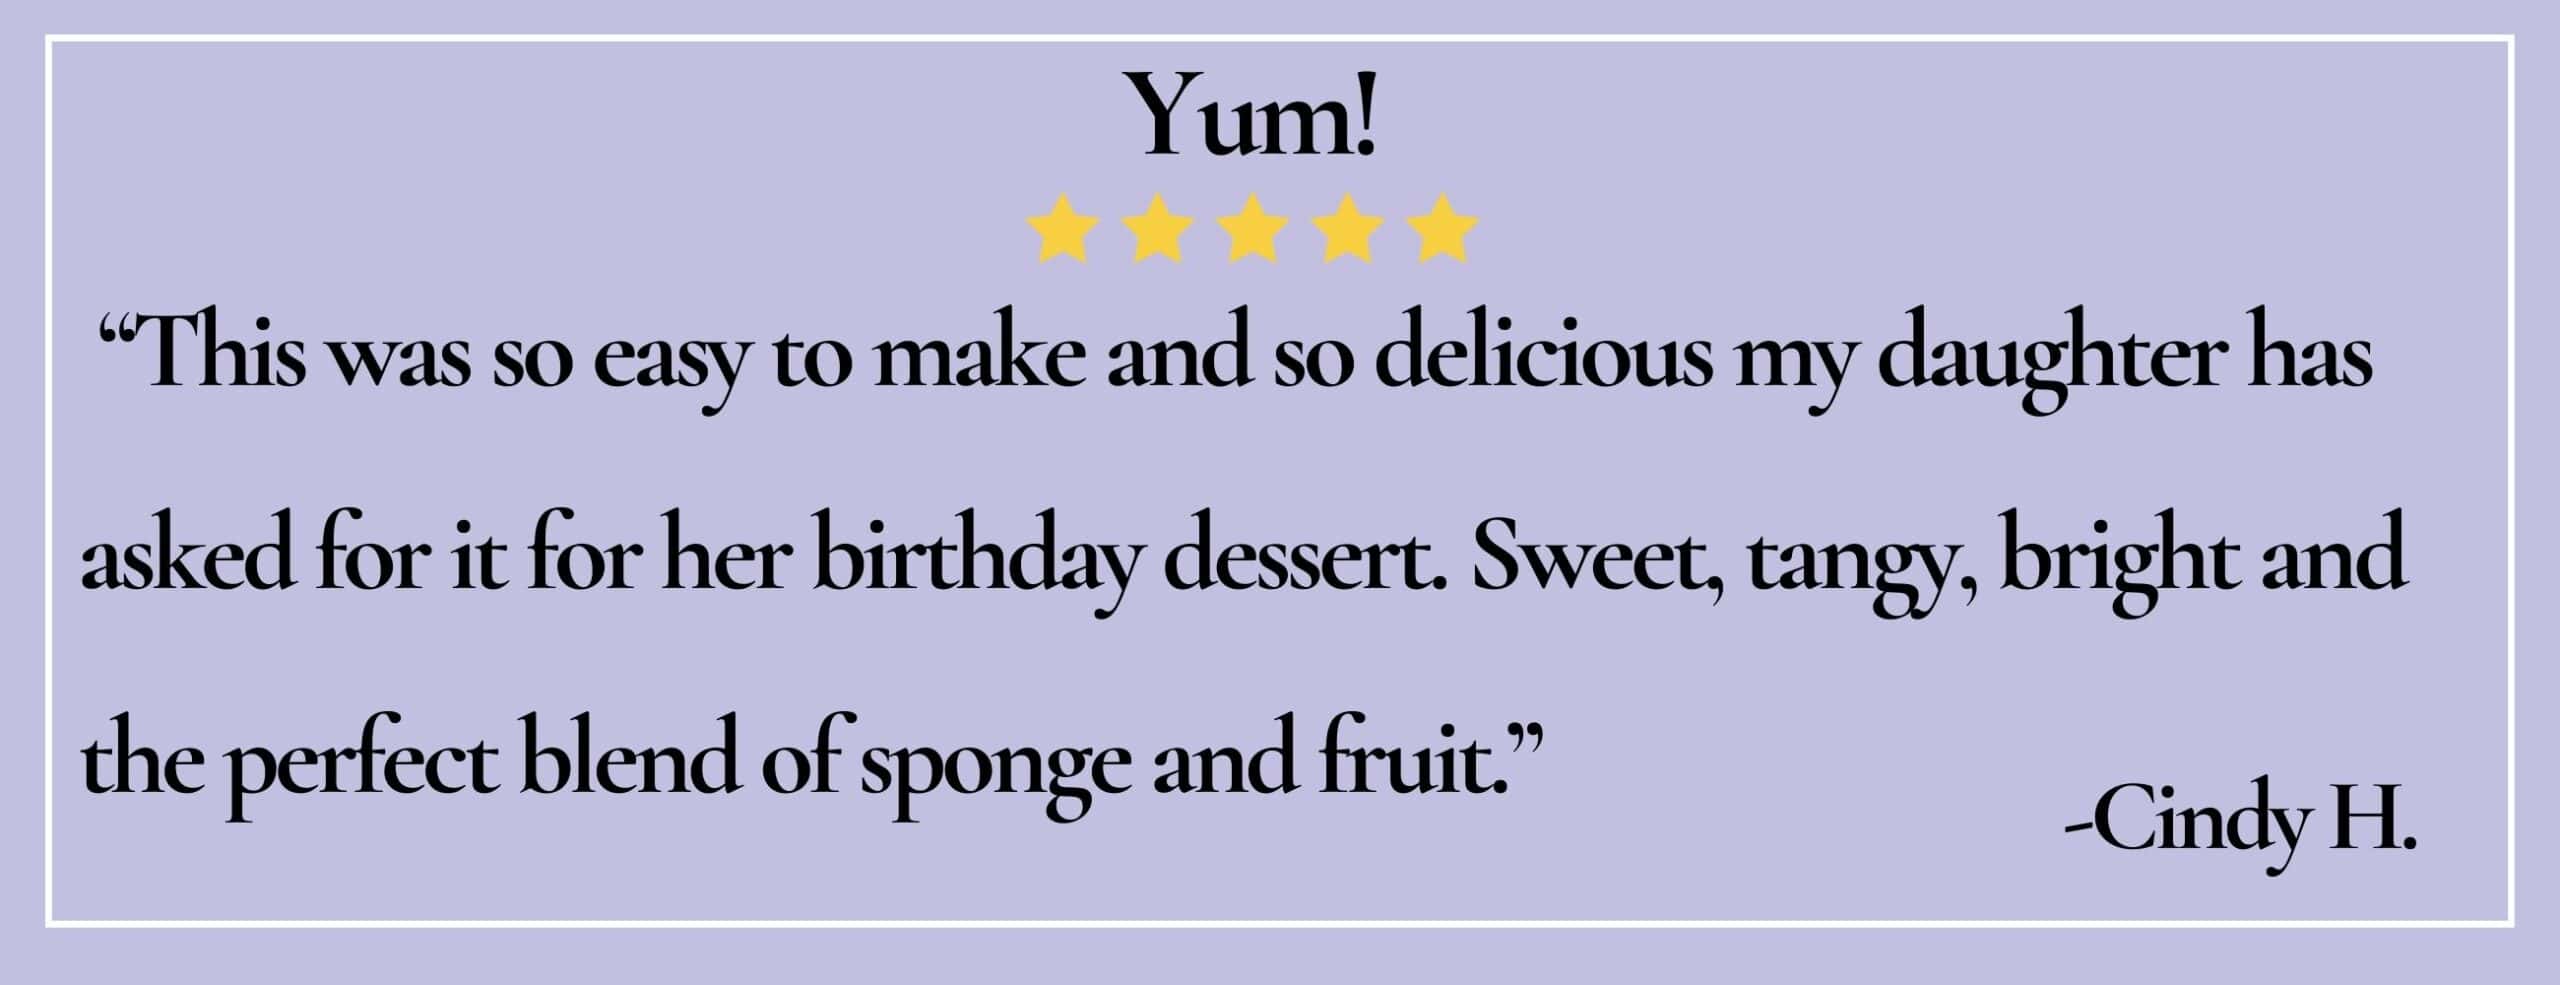 text box with paraphrase: Sweet, tangy, bright and the perfect blend of sponge and fruit. -Cindy H.